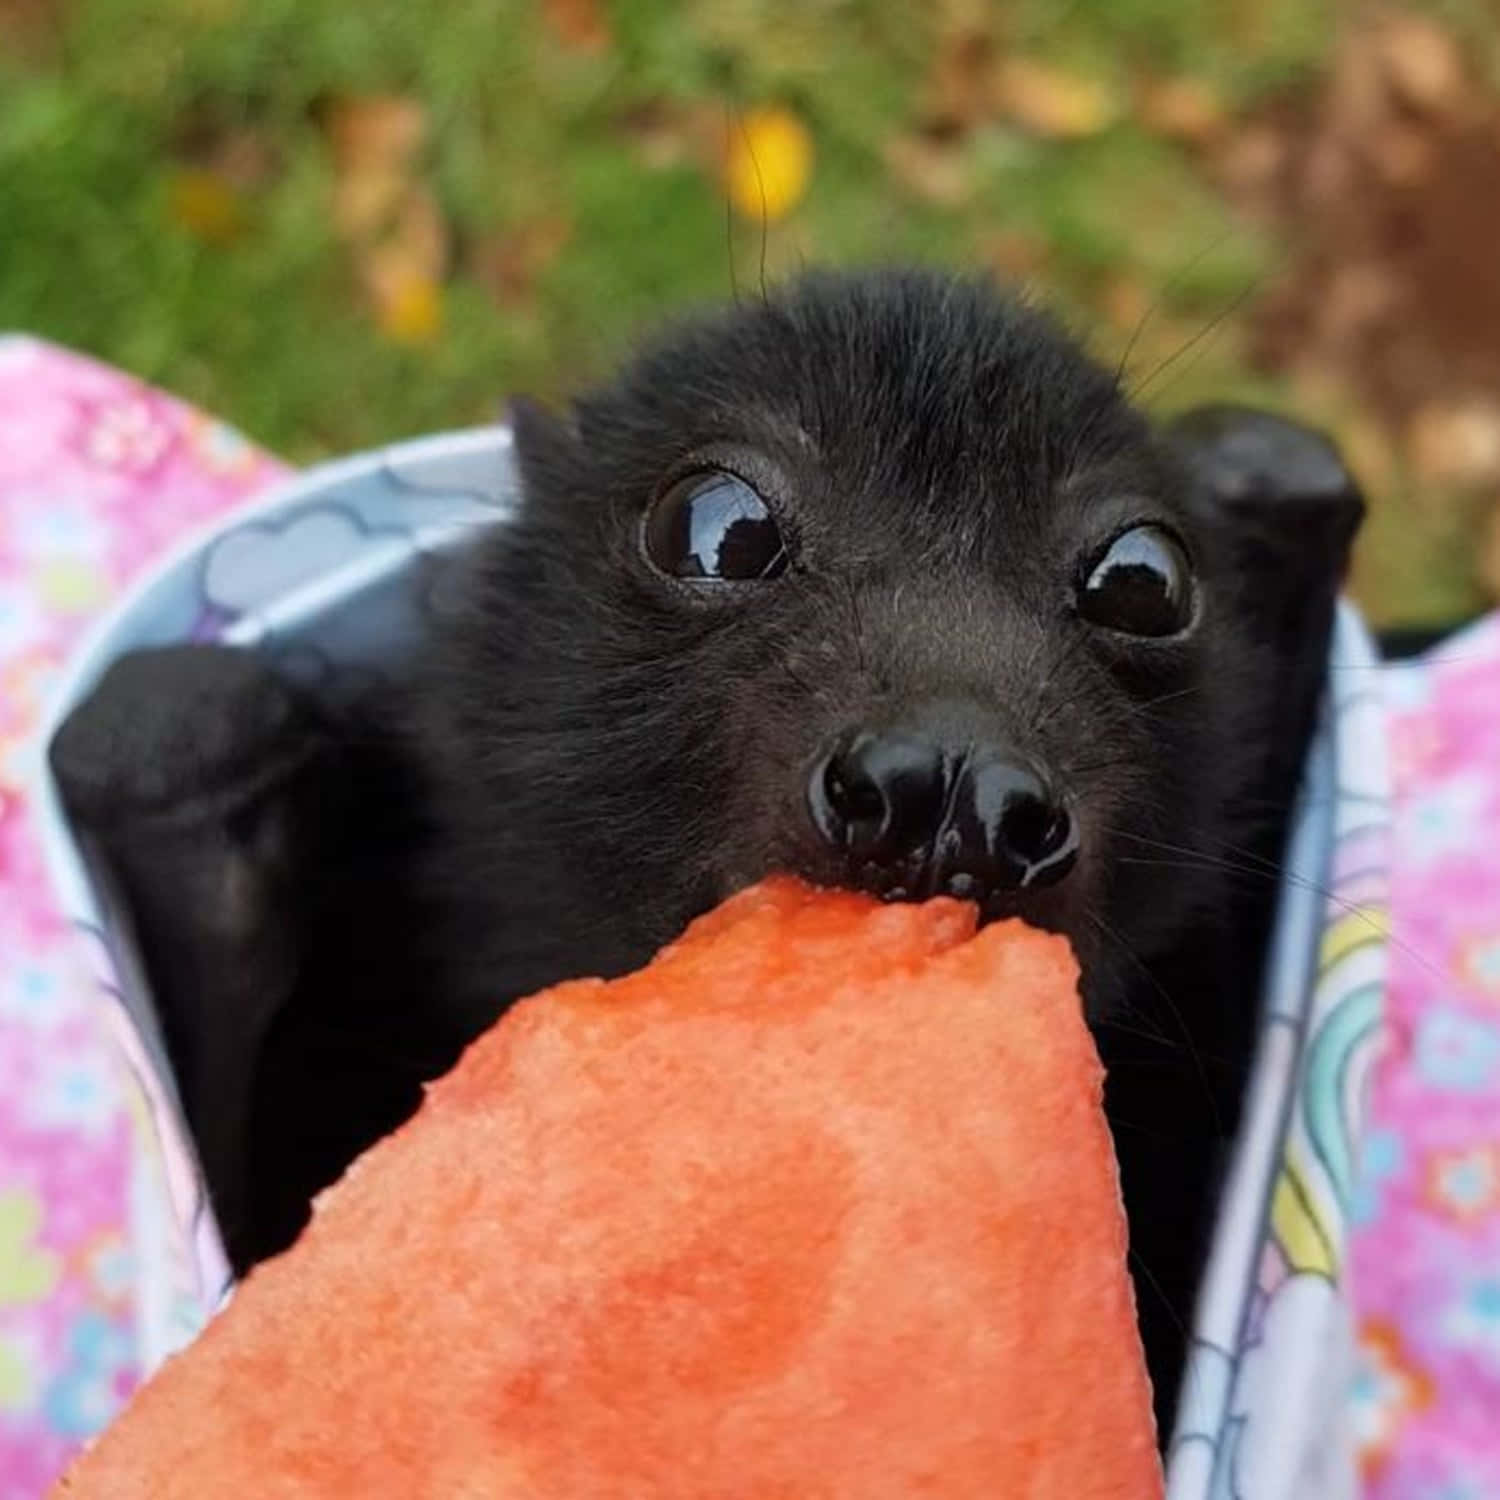 Cute Bat Eating Pictures